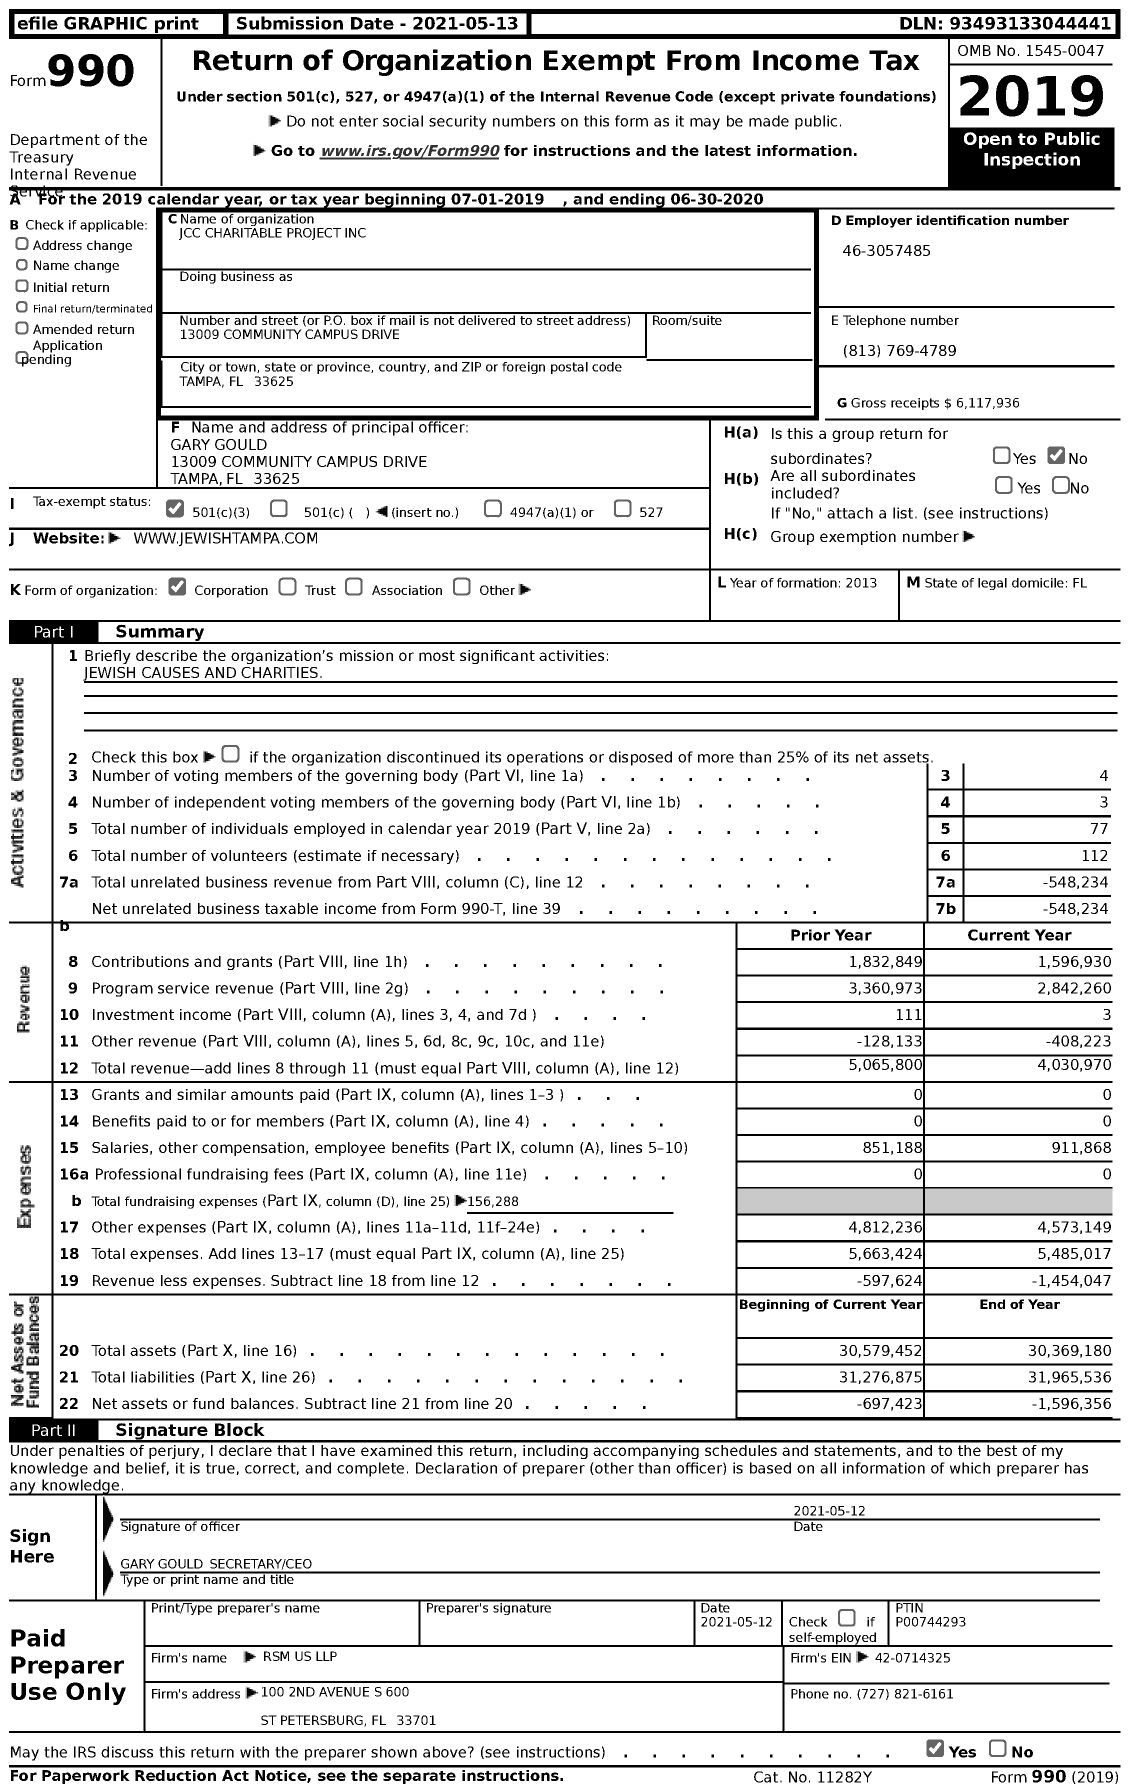 Image of first page of 2019 Form 990 for JCC Charitable Project